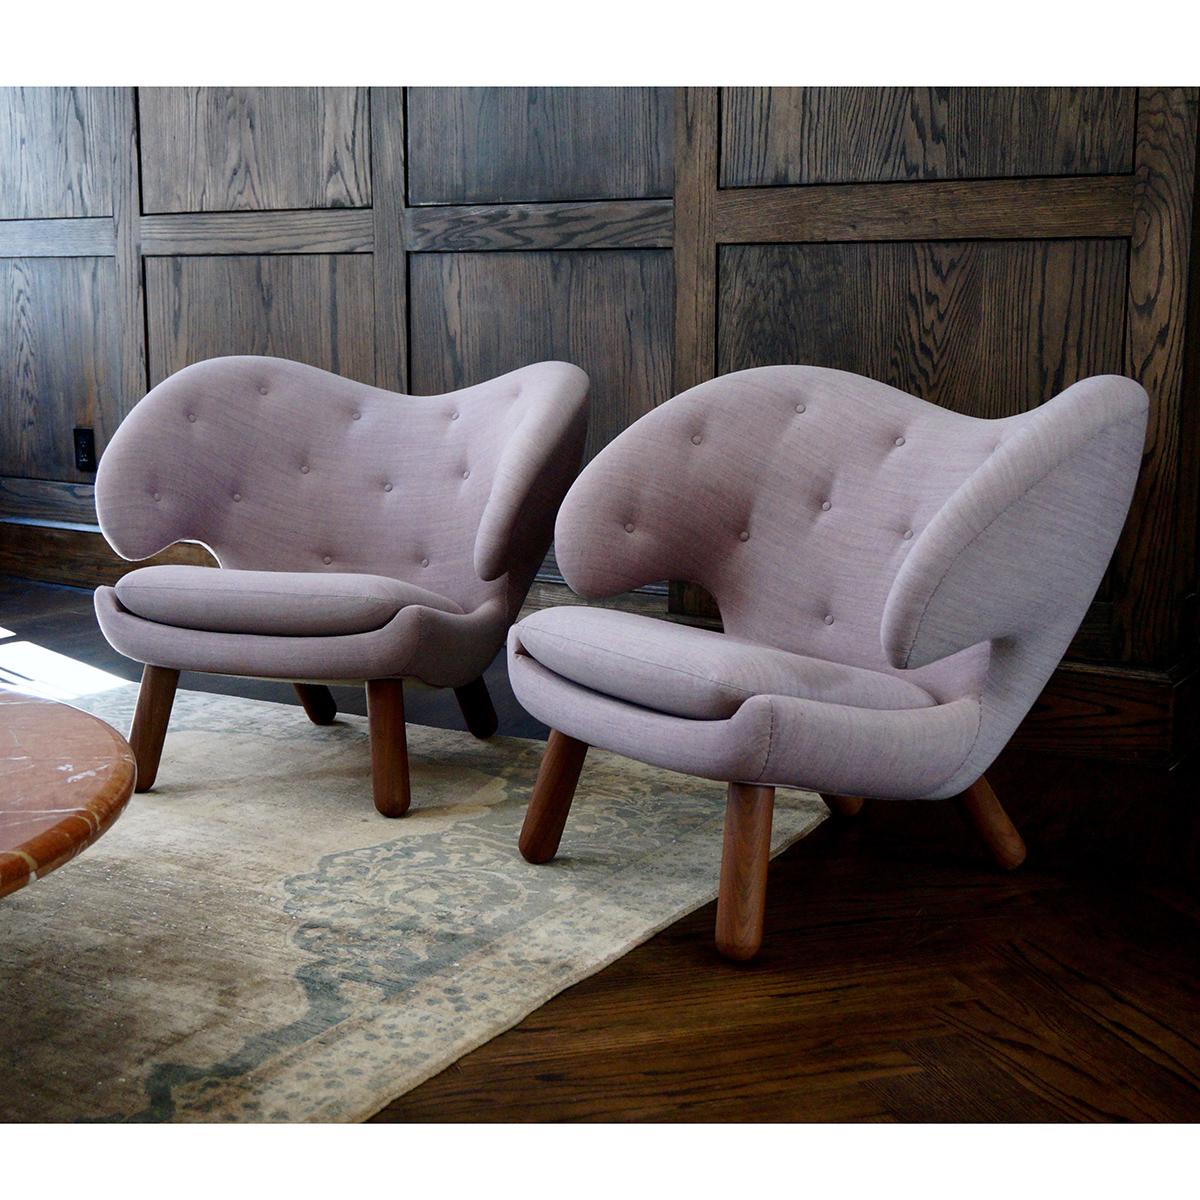 Set of Two Pelican Chairs Upholstered in Fabric and Wood by Finn Juhl 3